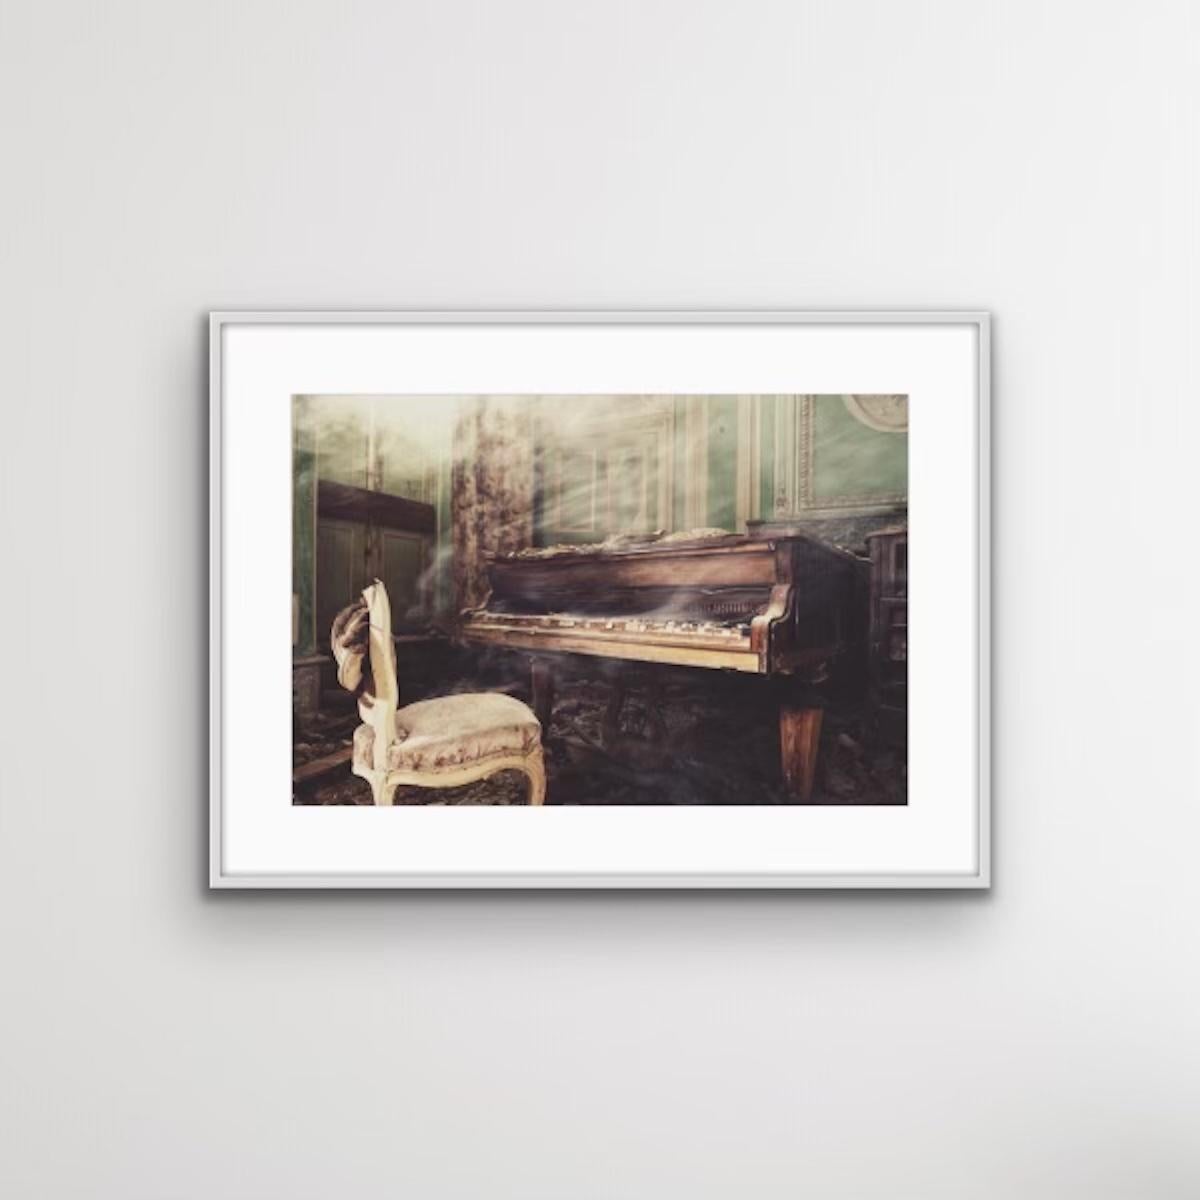 Castle Piano by Gina Soden, Interior, Architecture, History, Music  - Conceptual Photograph by Gina Soden 